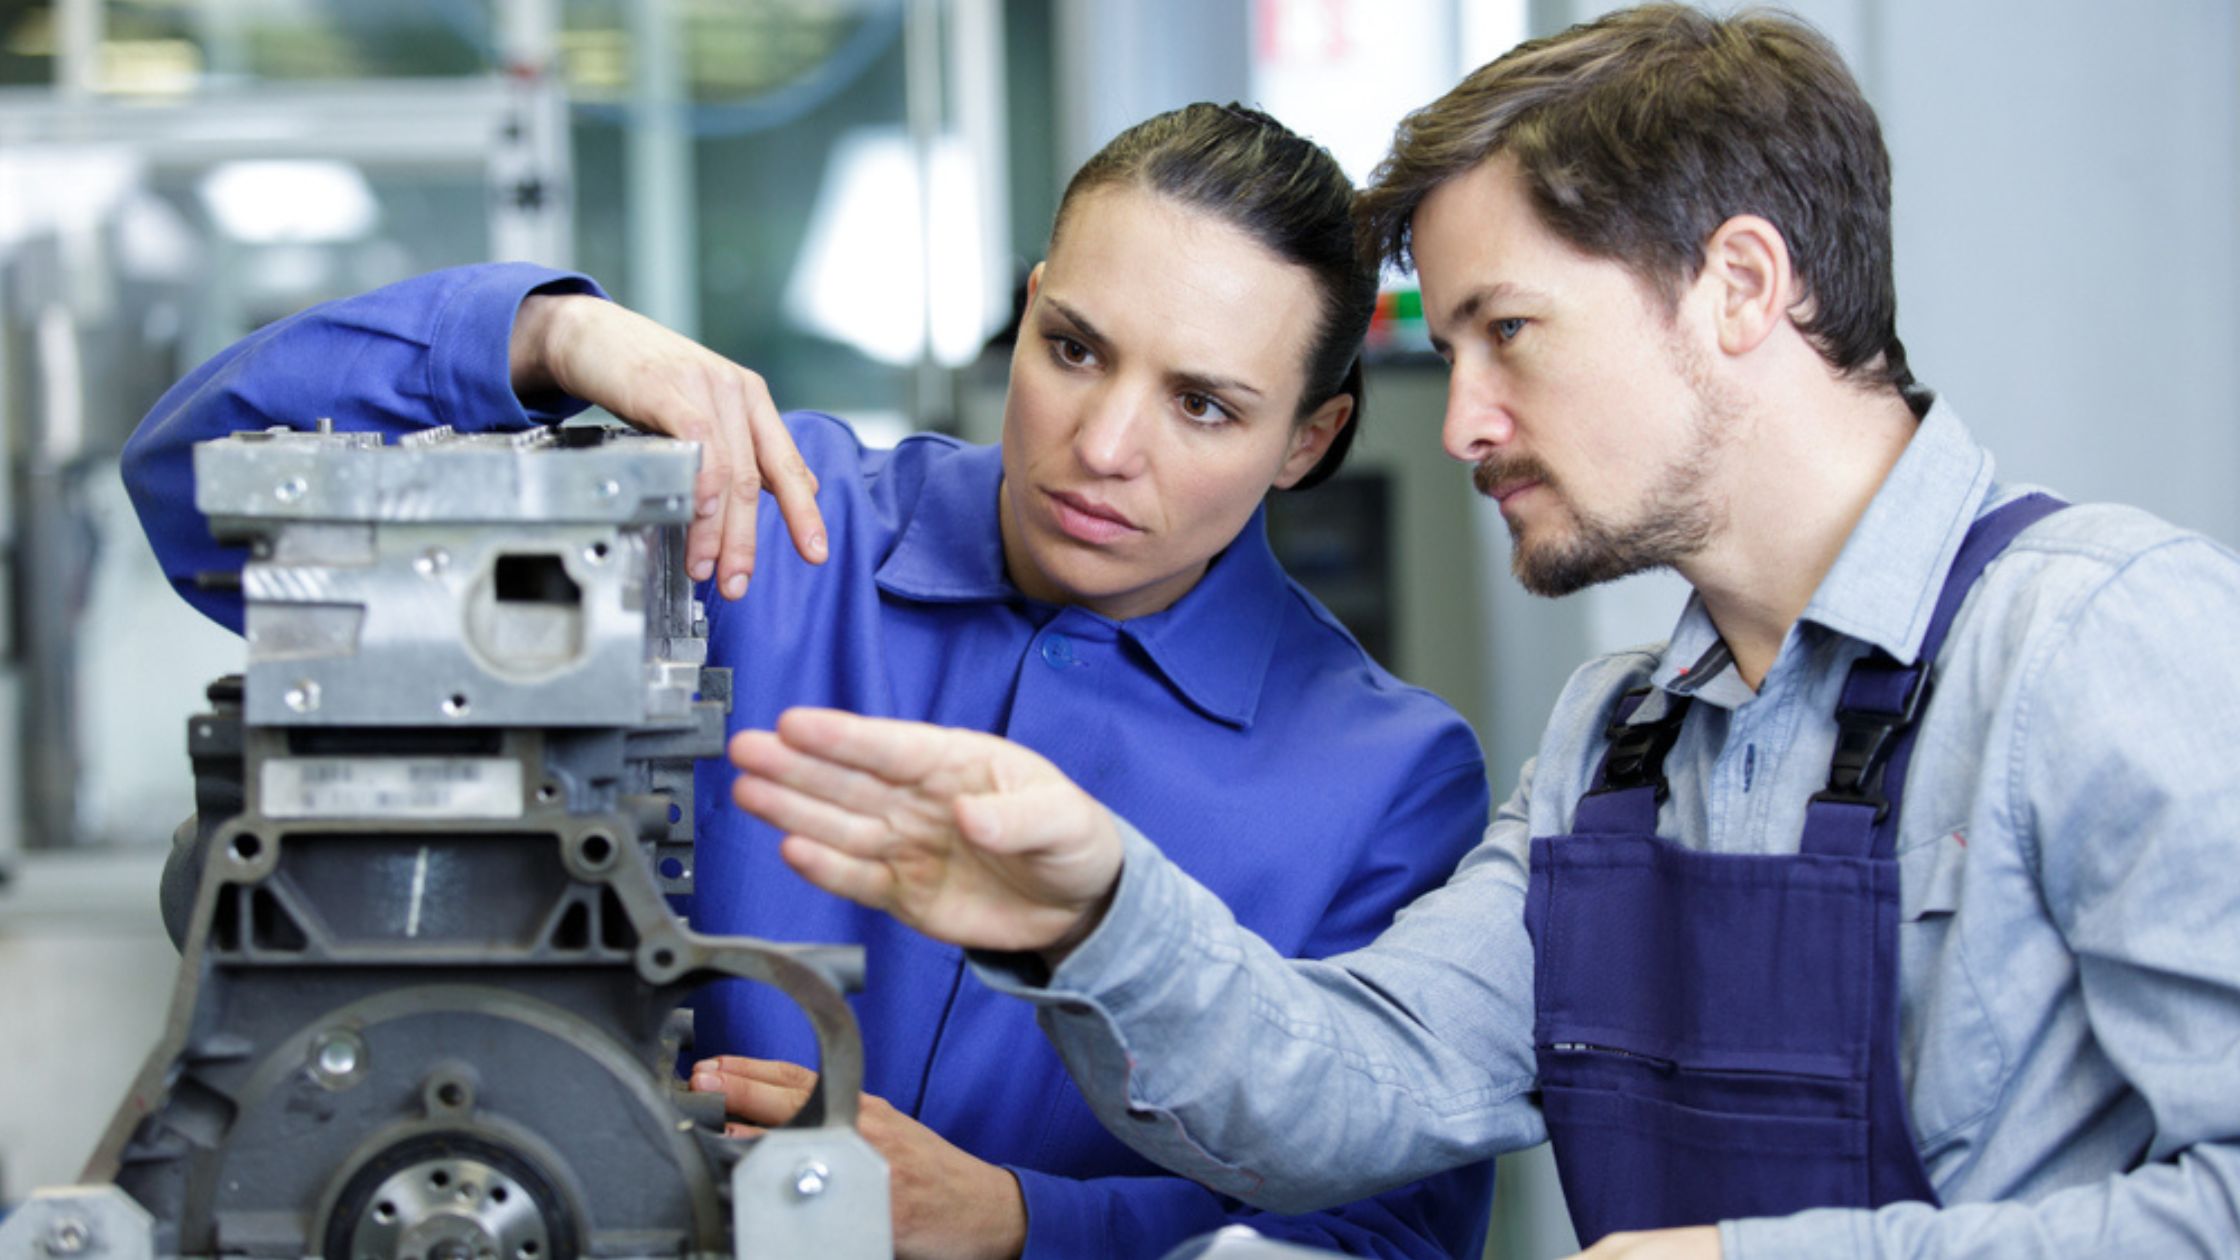 Practical training for mechanical engineers